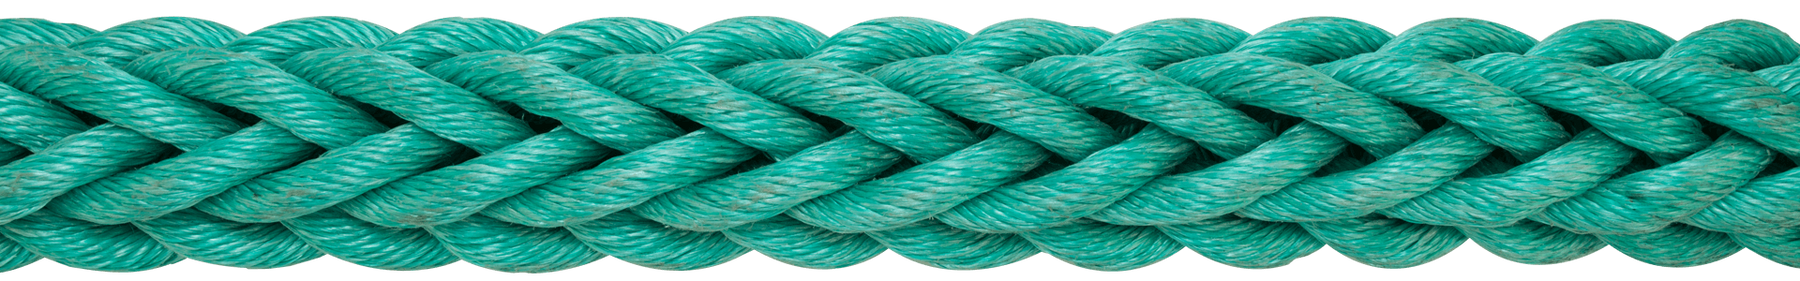 Southern Ropes Braided Rope